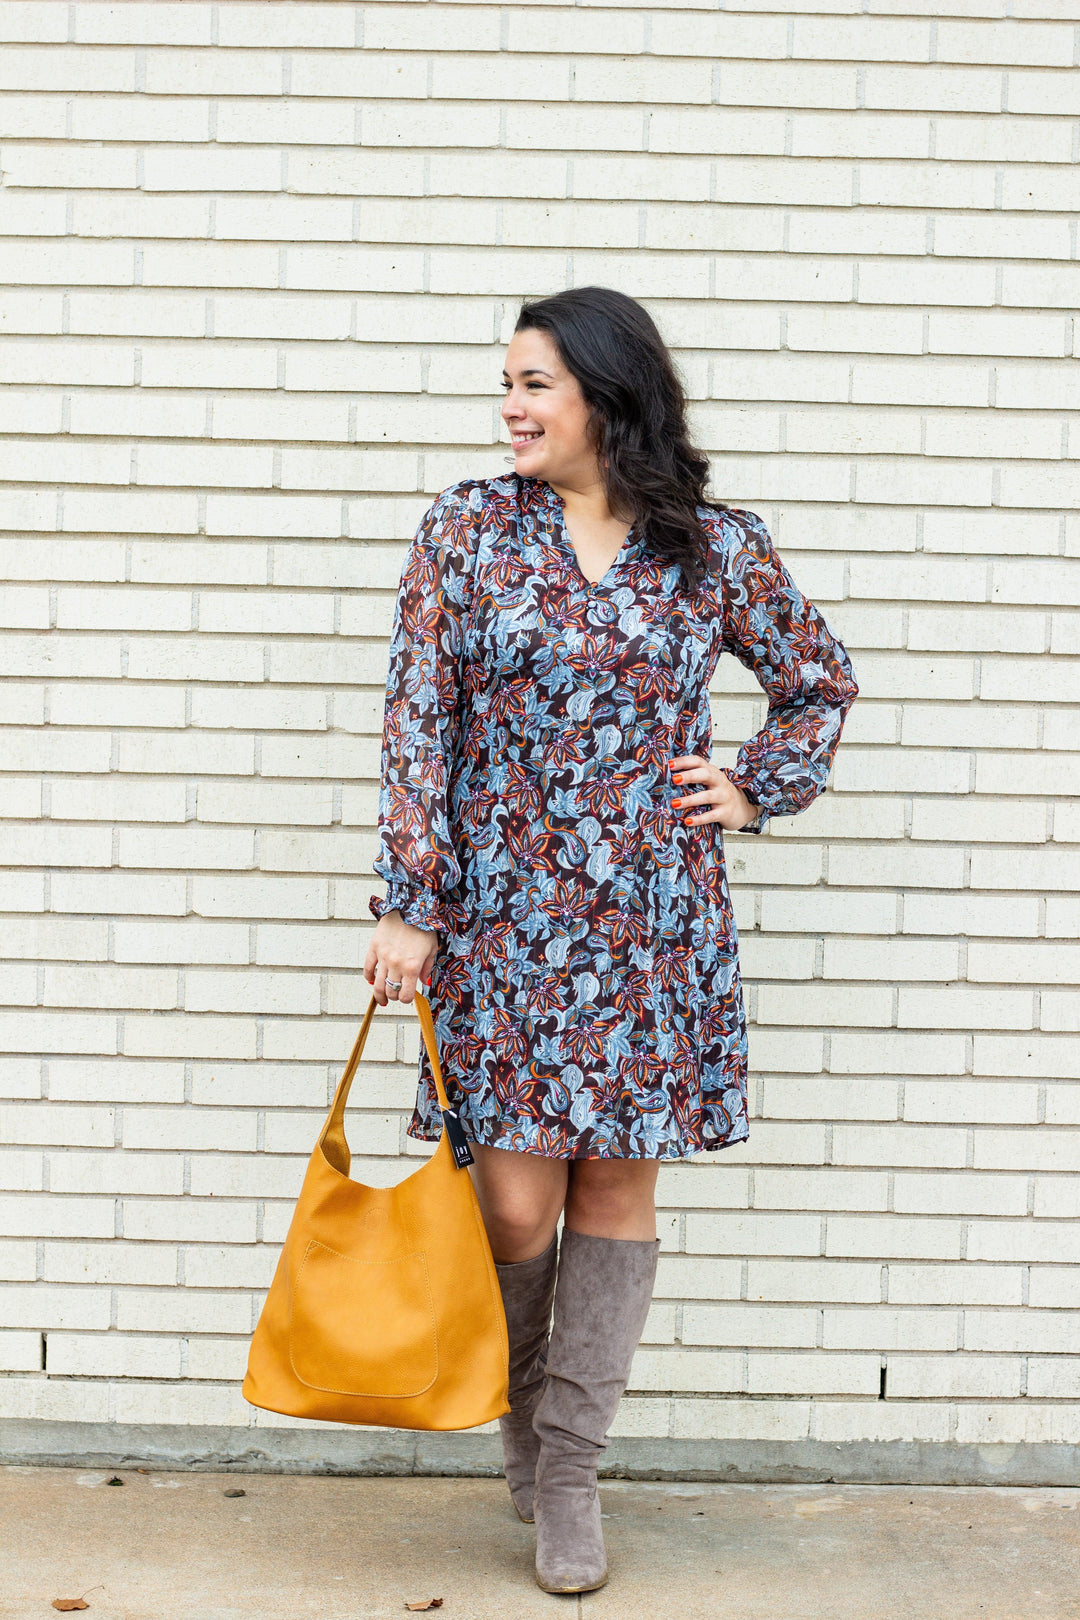 Sheer Paisley Print Belted Dress - Très Chic